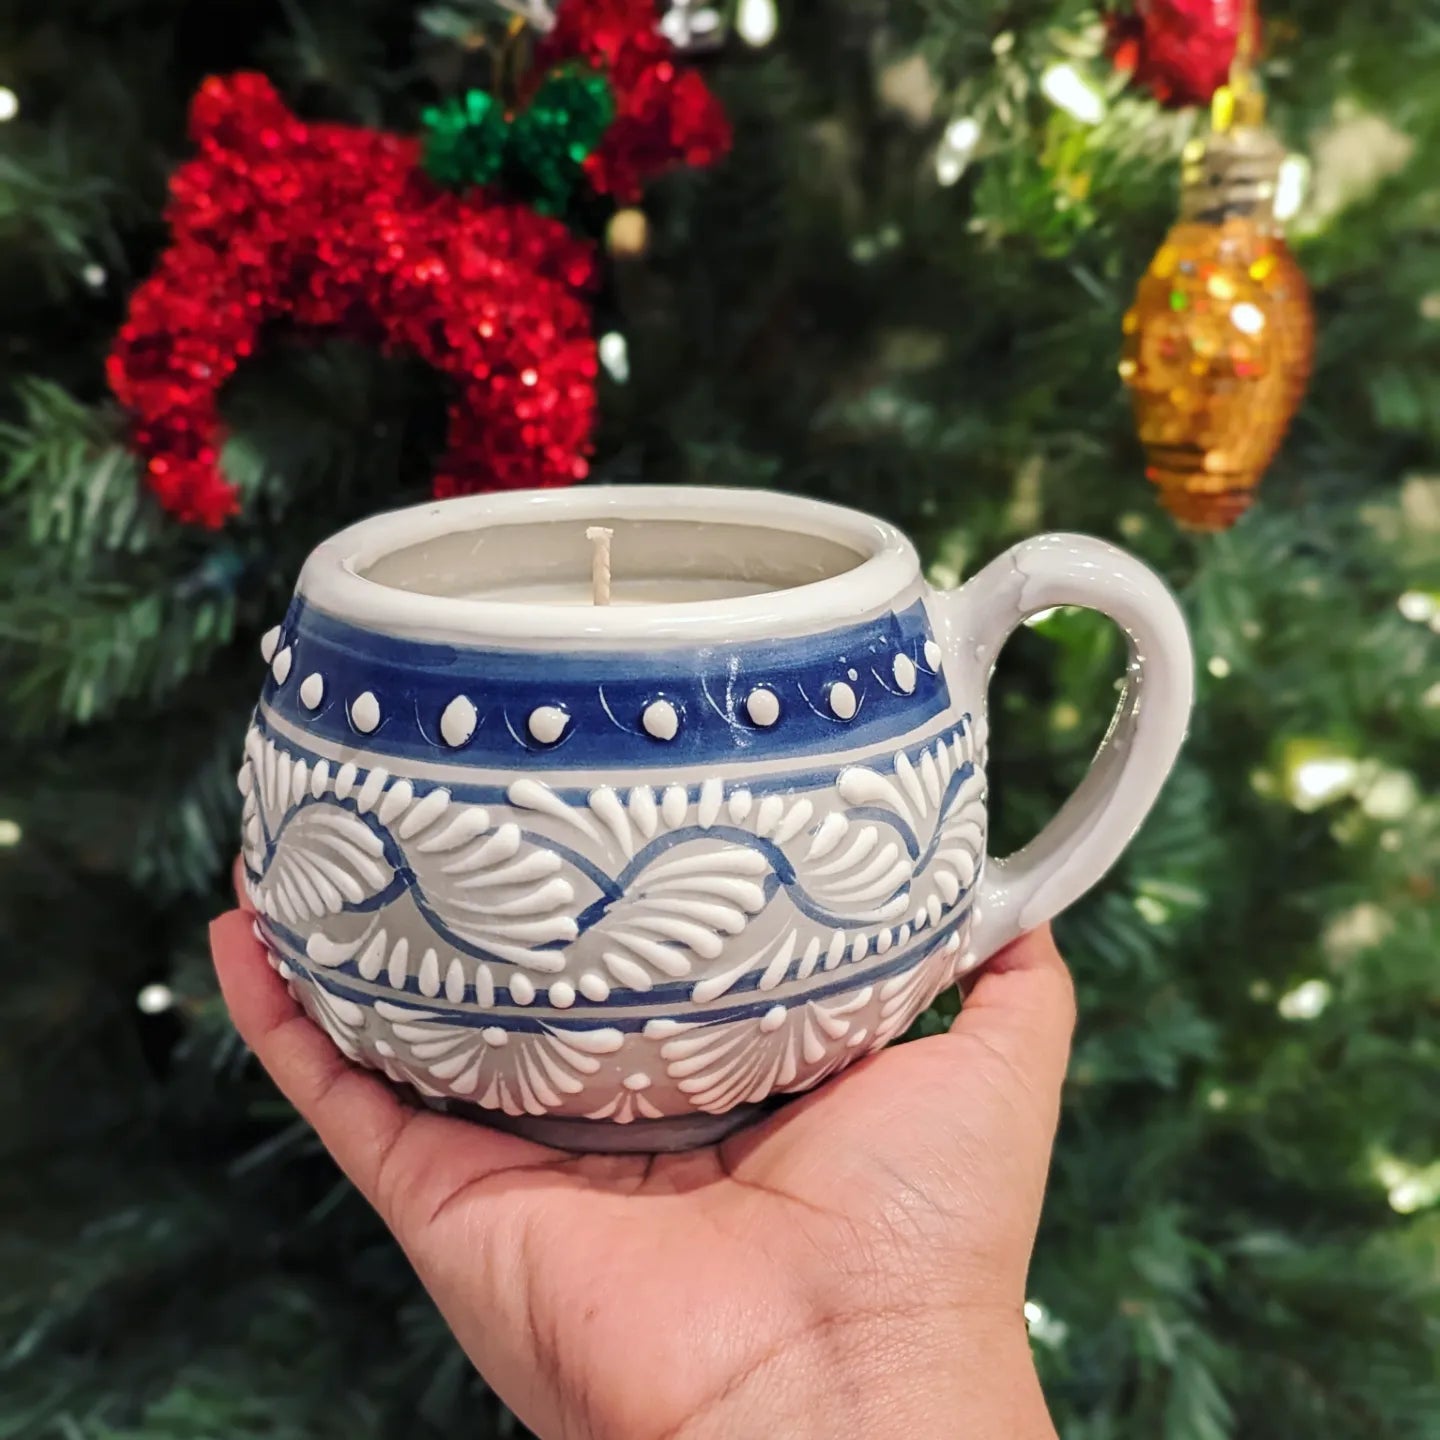 Artisanal candle placed on a hand. Blue Grey color with white hand painted design. Handcrafted by Artisan in Puebla, Mexico. 100% All Natural Soy Candle. Reuse the talavera as home decor or storage.